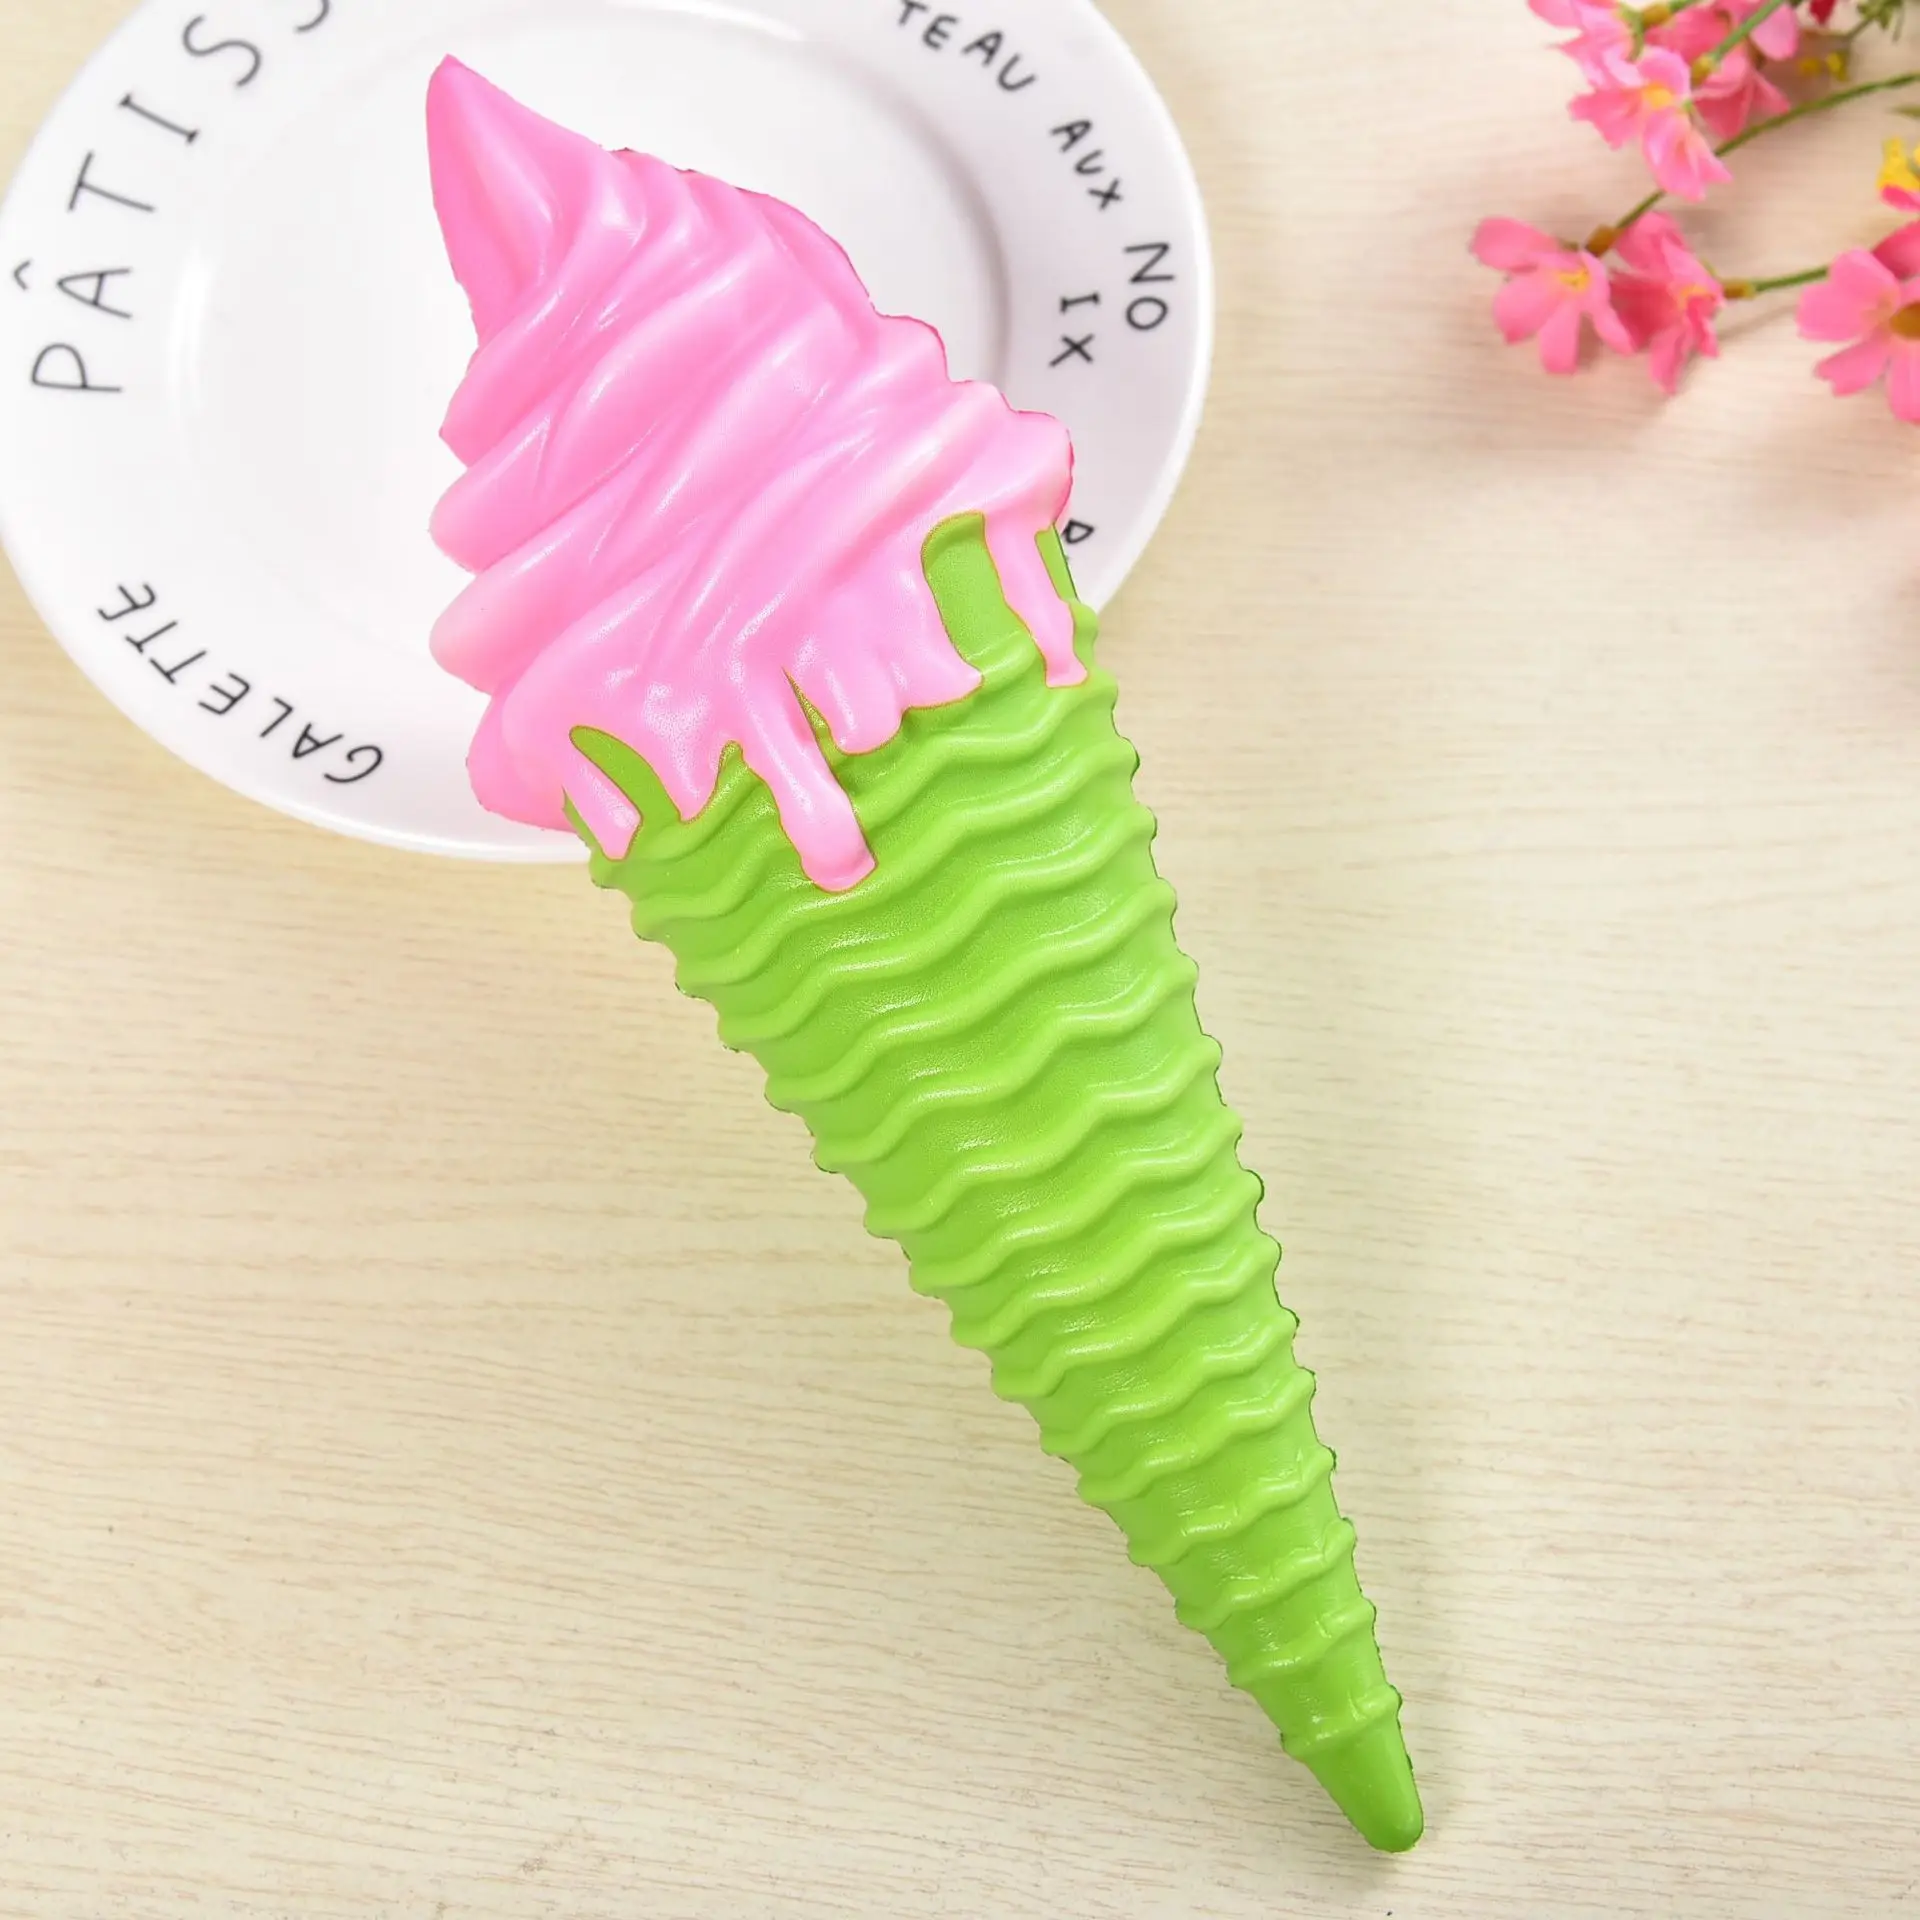 Colorful Ice Cream Squishy Slow Rising Soft Creative Squeeze Toys Simulation Stress Relief Funny Xmas Gift Toy for Kids pea popper fidget